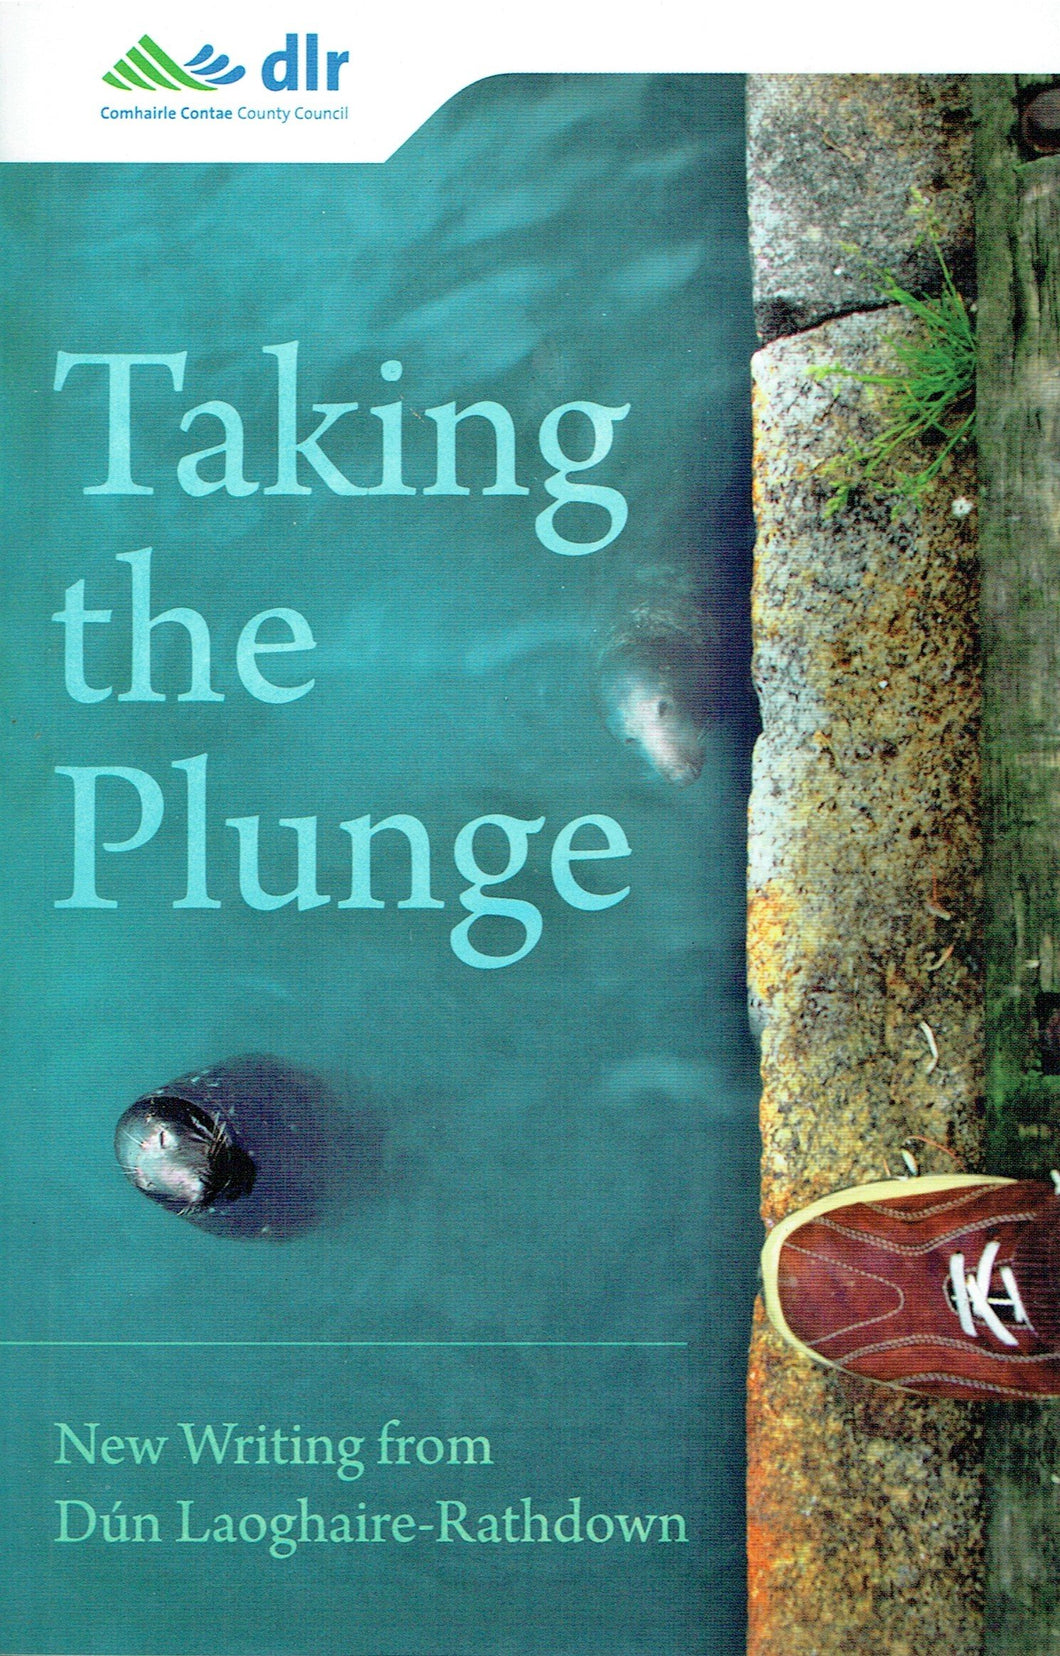 Taking the Plunge: New Writing from Dún Laoghaire-Rathdown